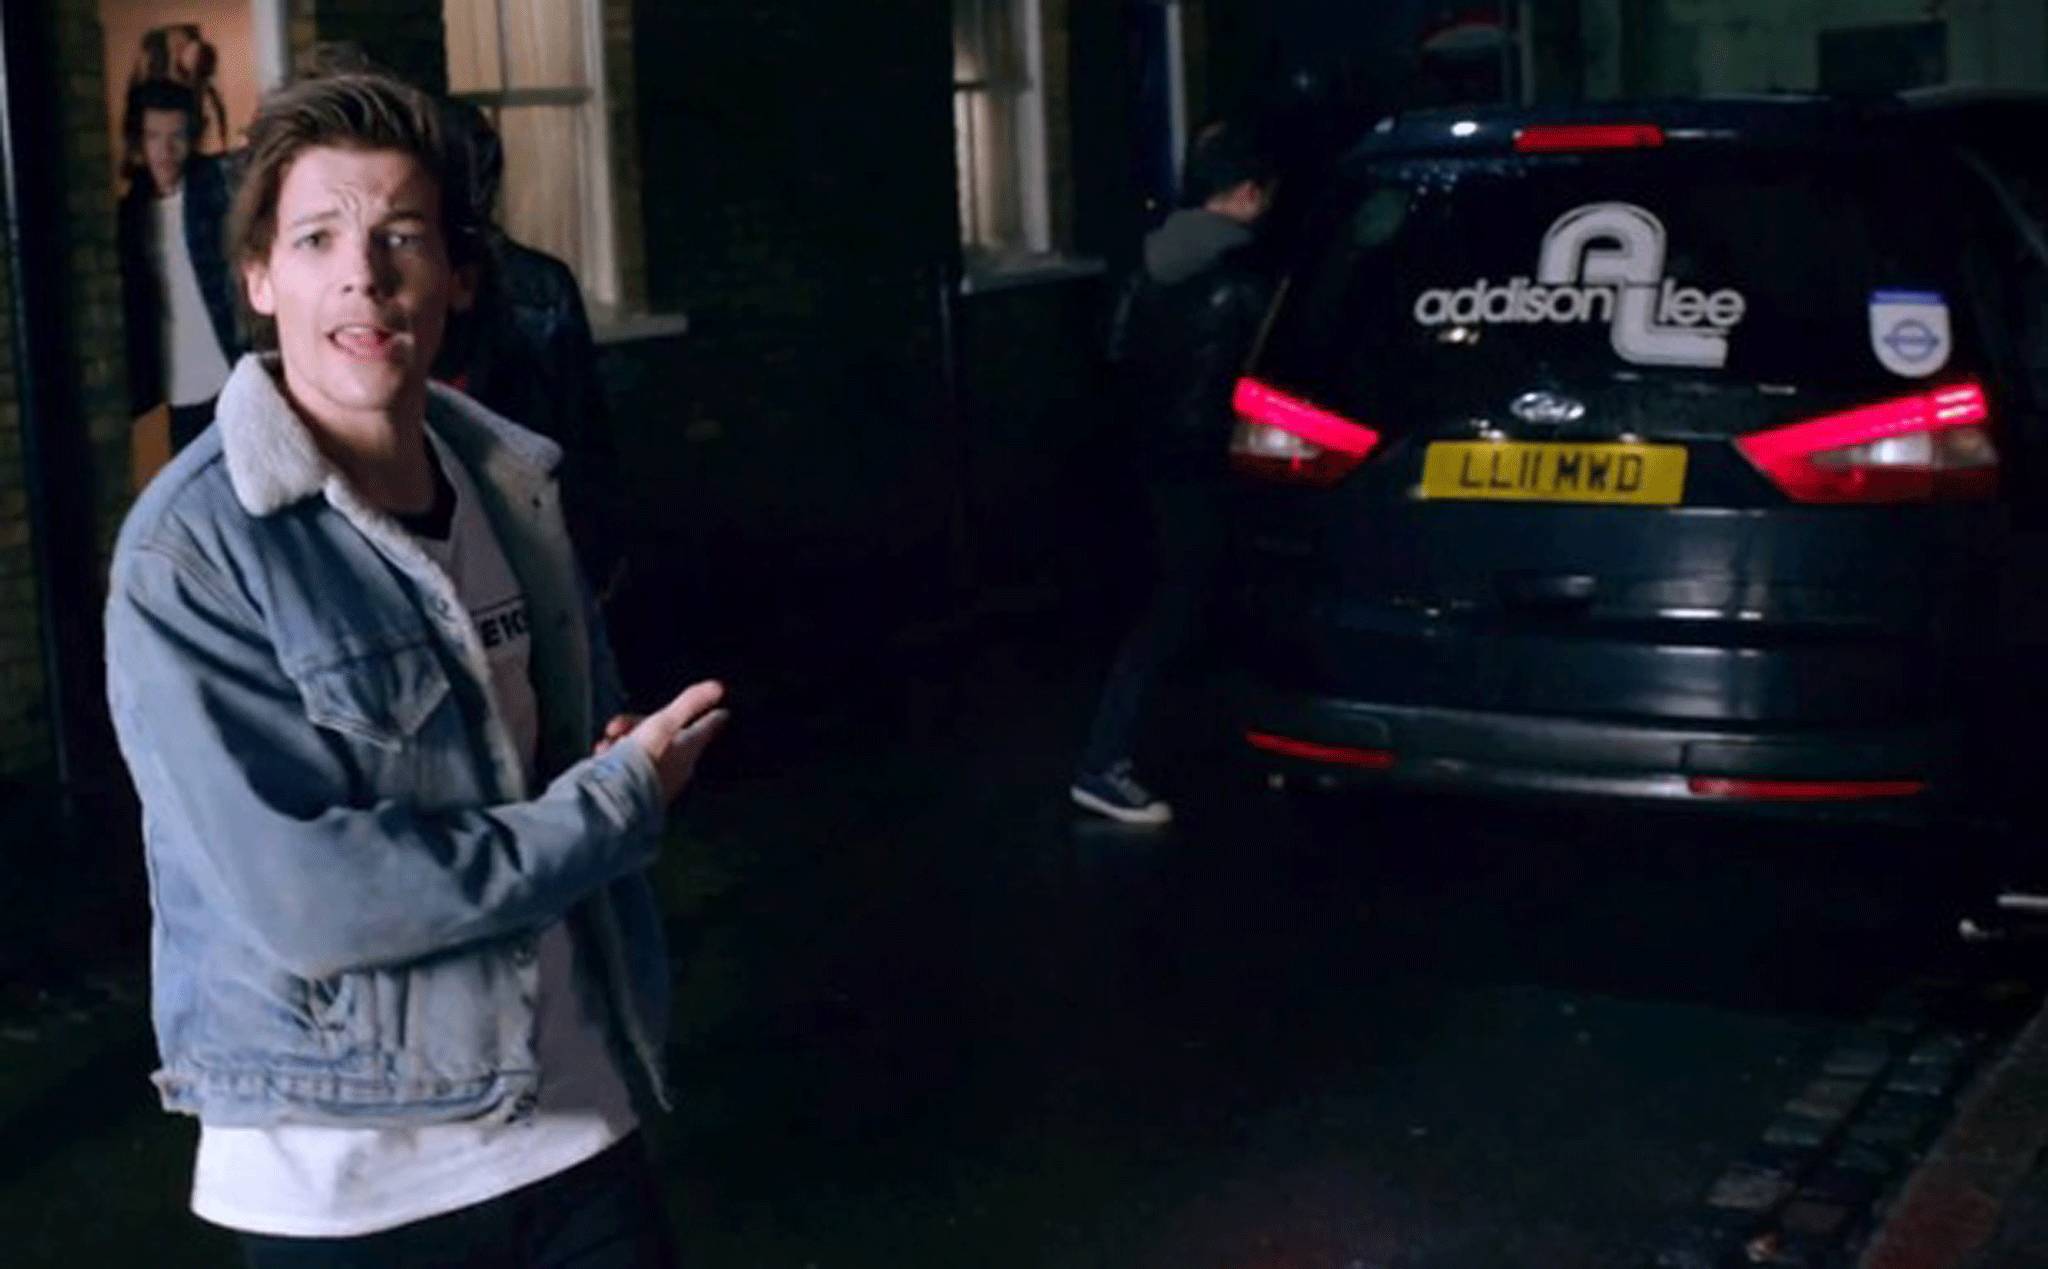 Addison Lee even make a cameo in the One Direction music video